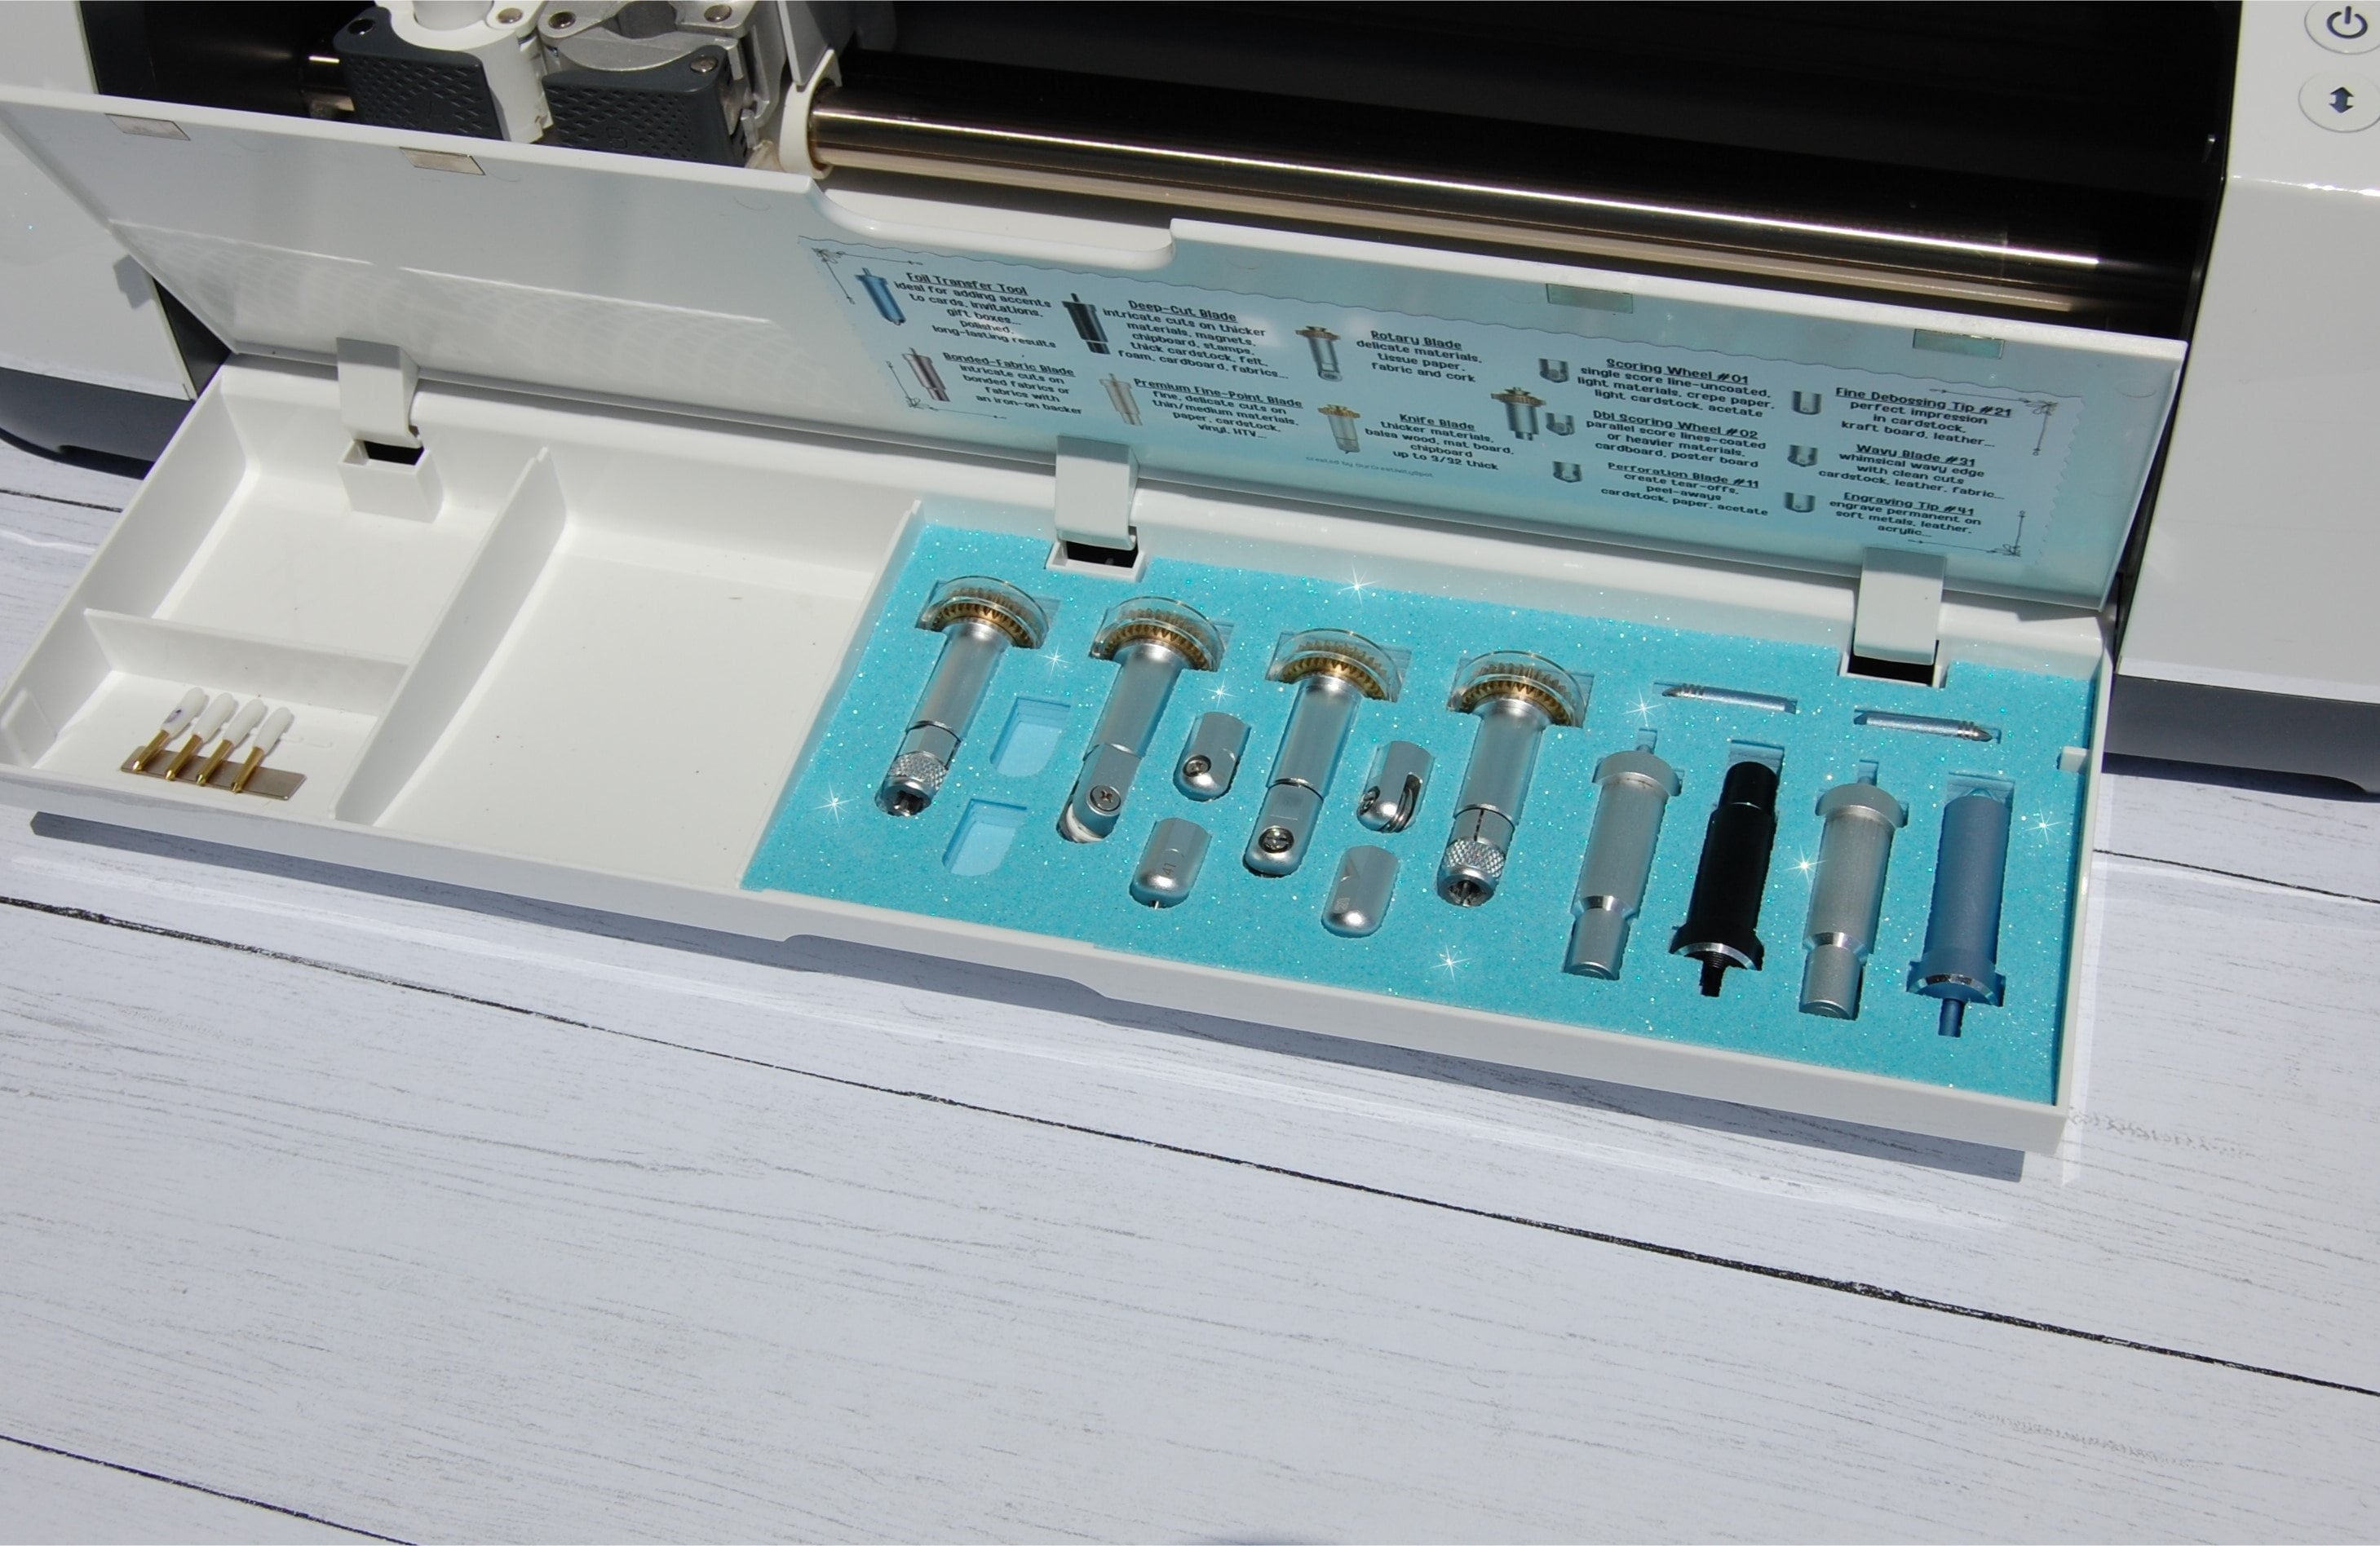 New Cricut Maker Blades & Tips: DIY Card with the Debossing Tip for  Beginners 